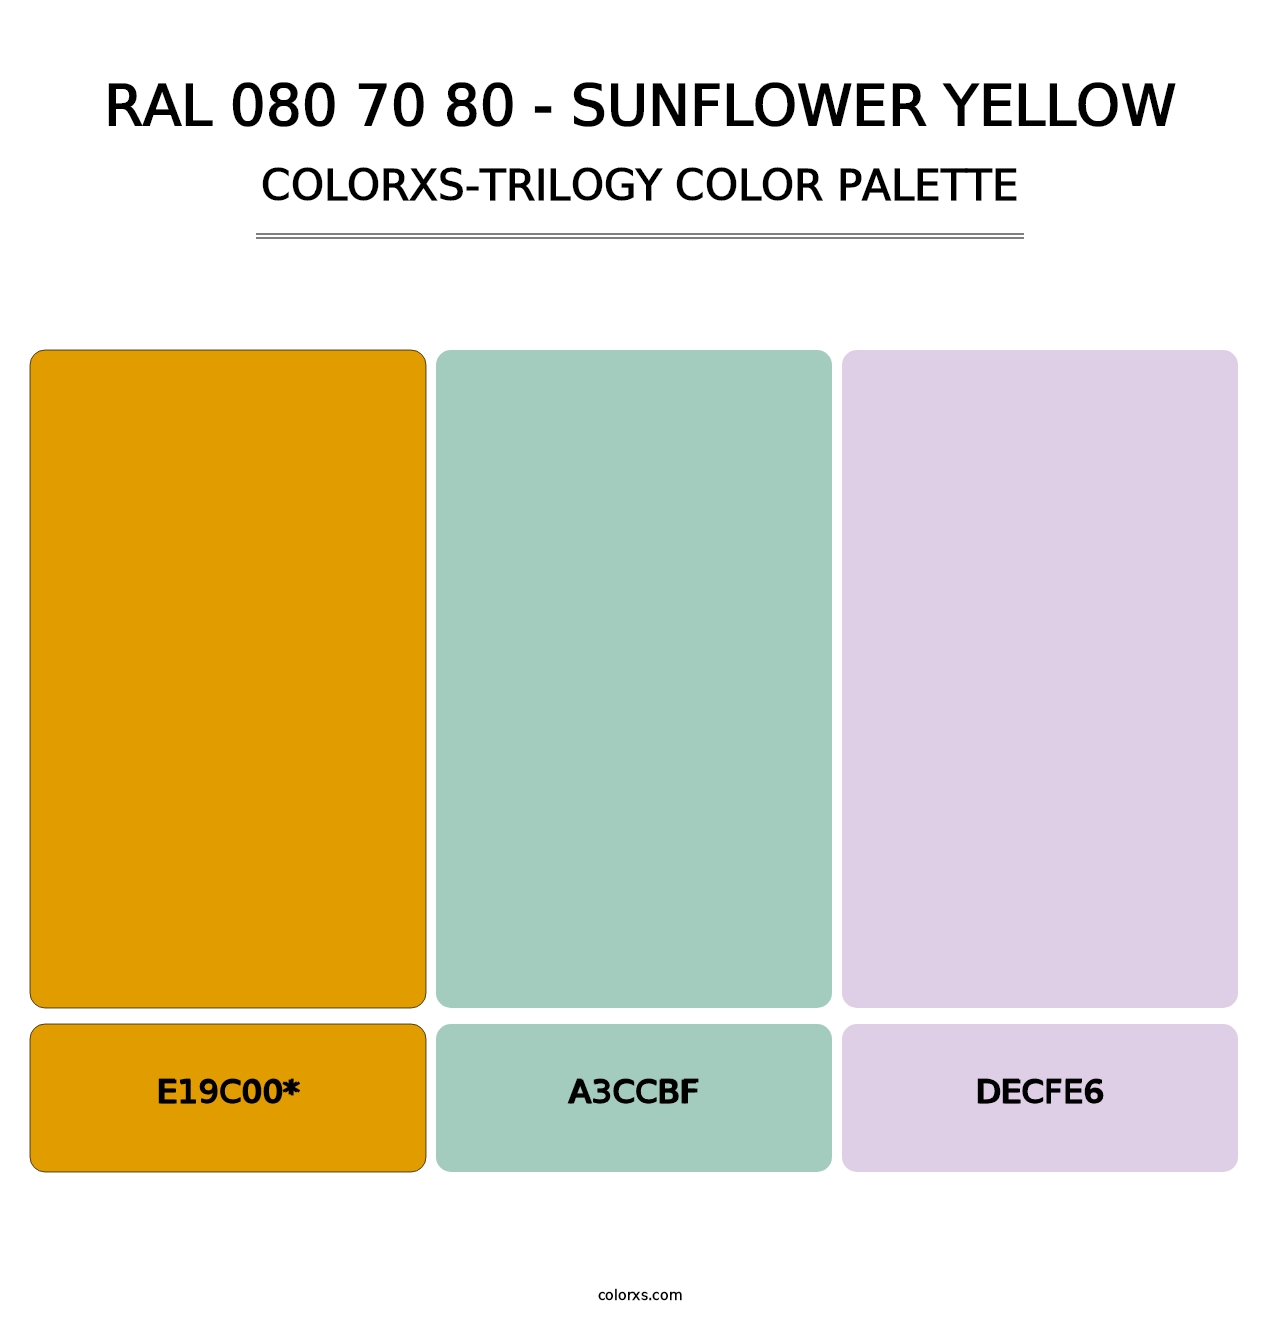 RAL 080 70 80 - Sunflower Yellow - Colorxs Trilogy Palette